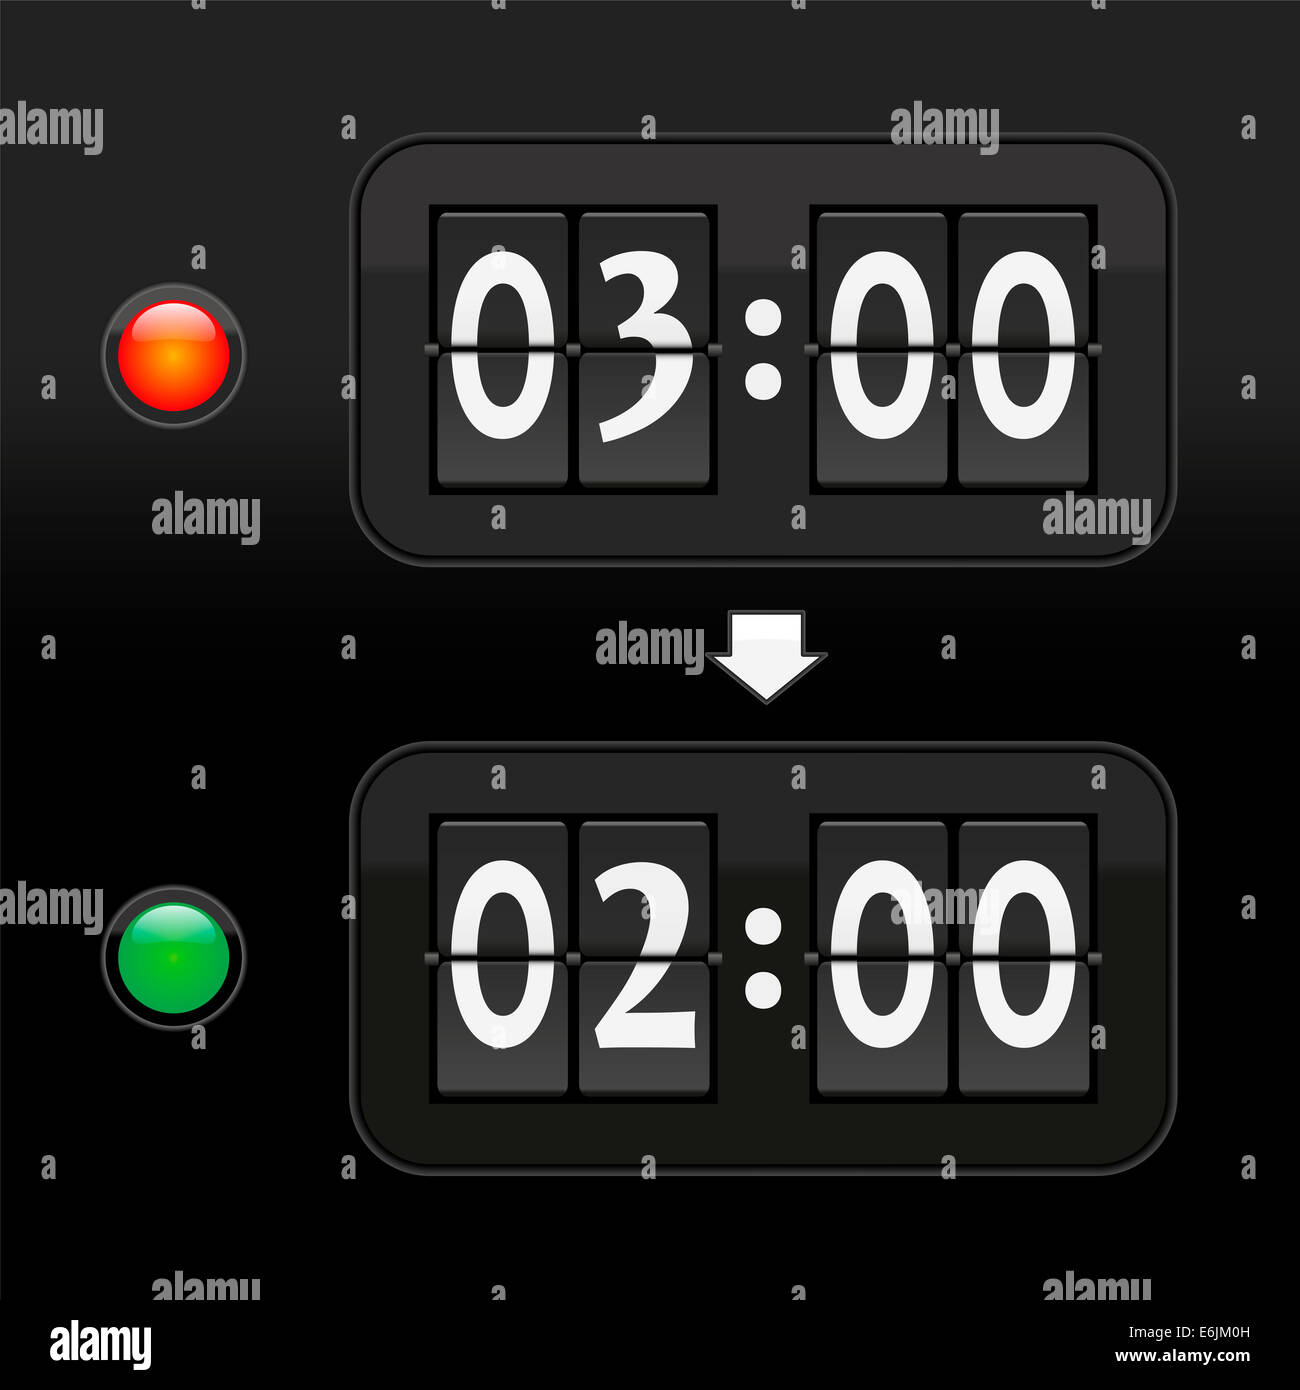 Switch to standard time in autumn from three a.m. to two a.m. - depicted with to digital time displays. Stock Photo